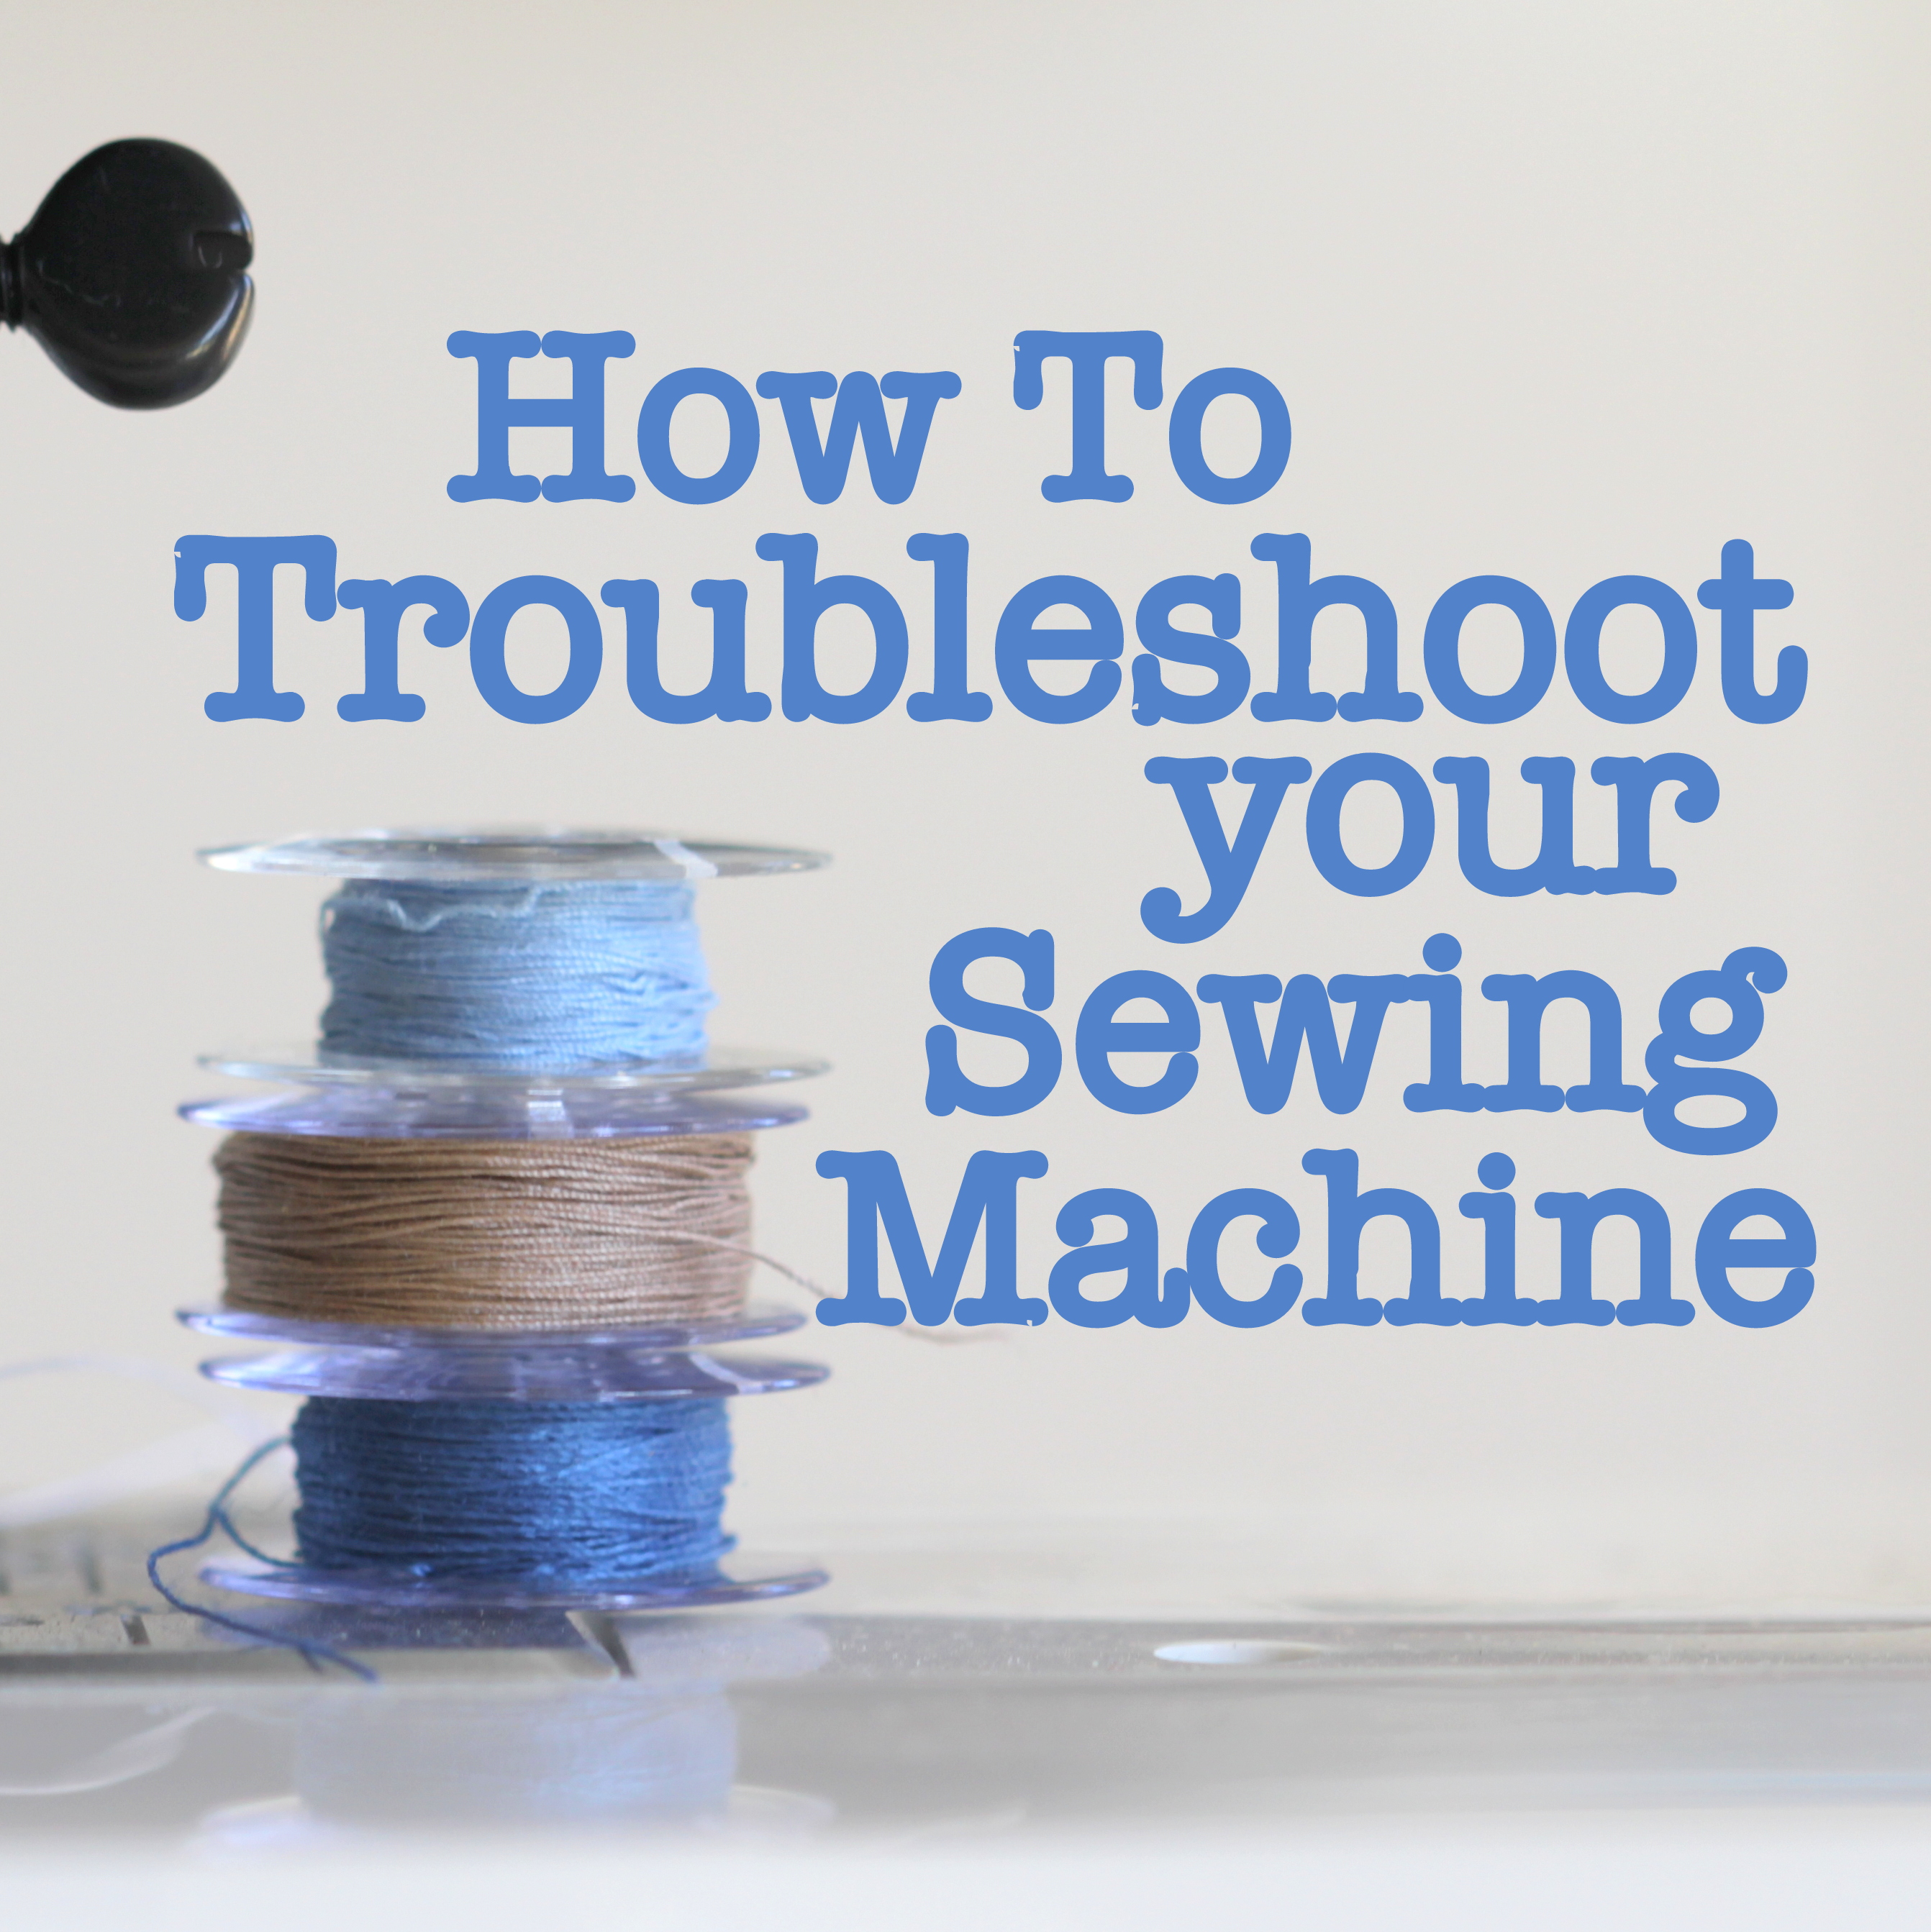 How to Troubleshoot your Sewing Machine